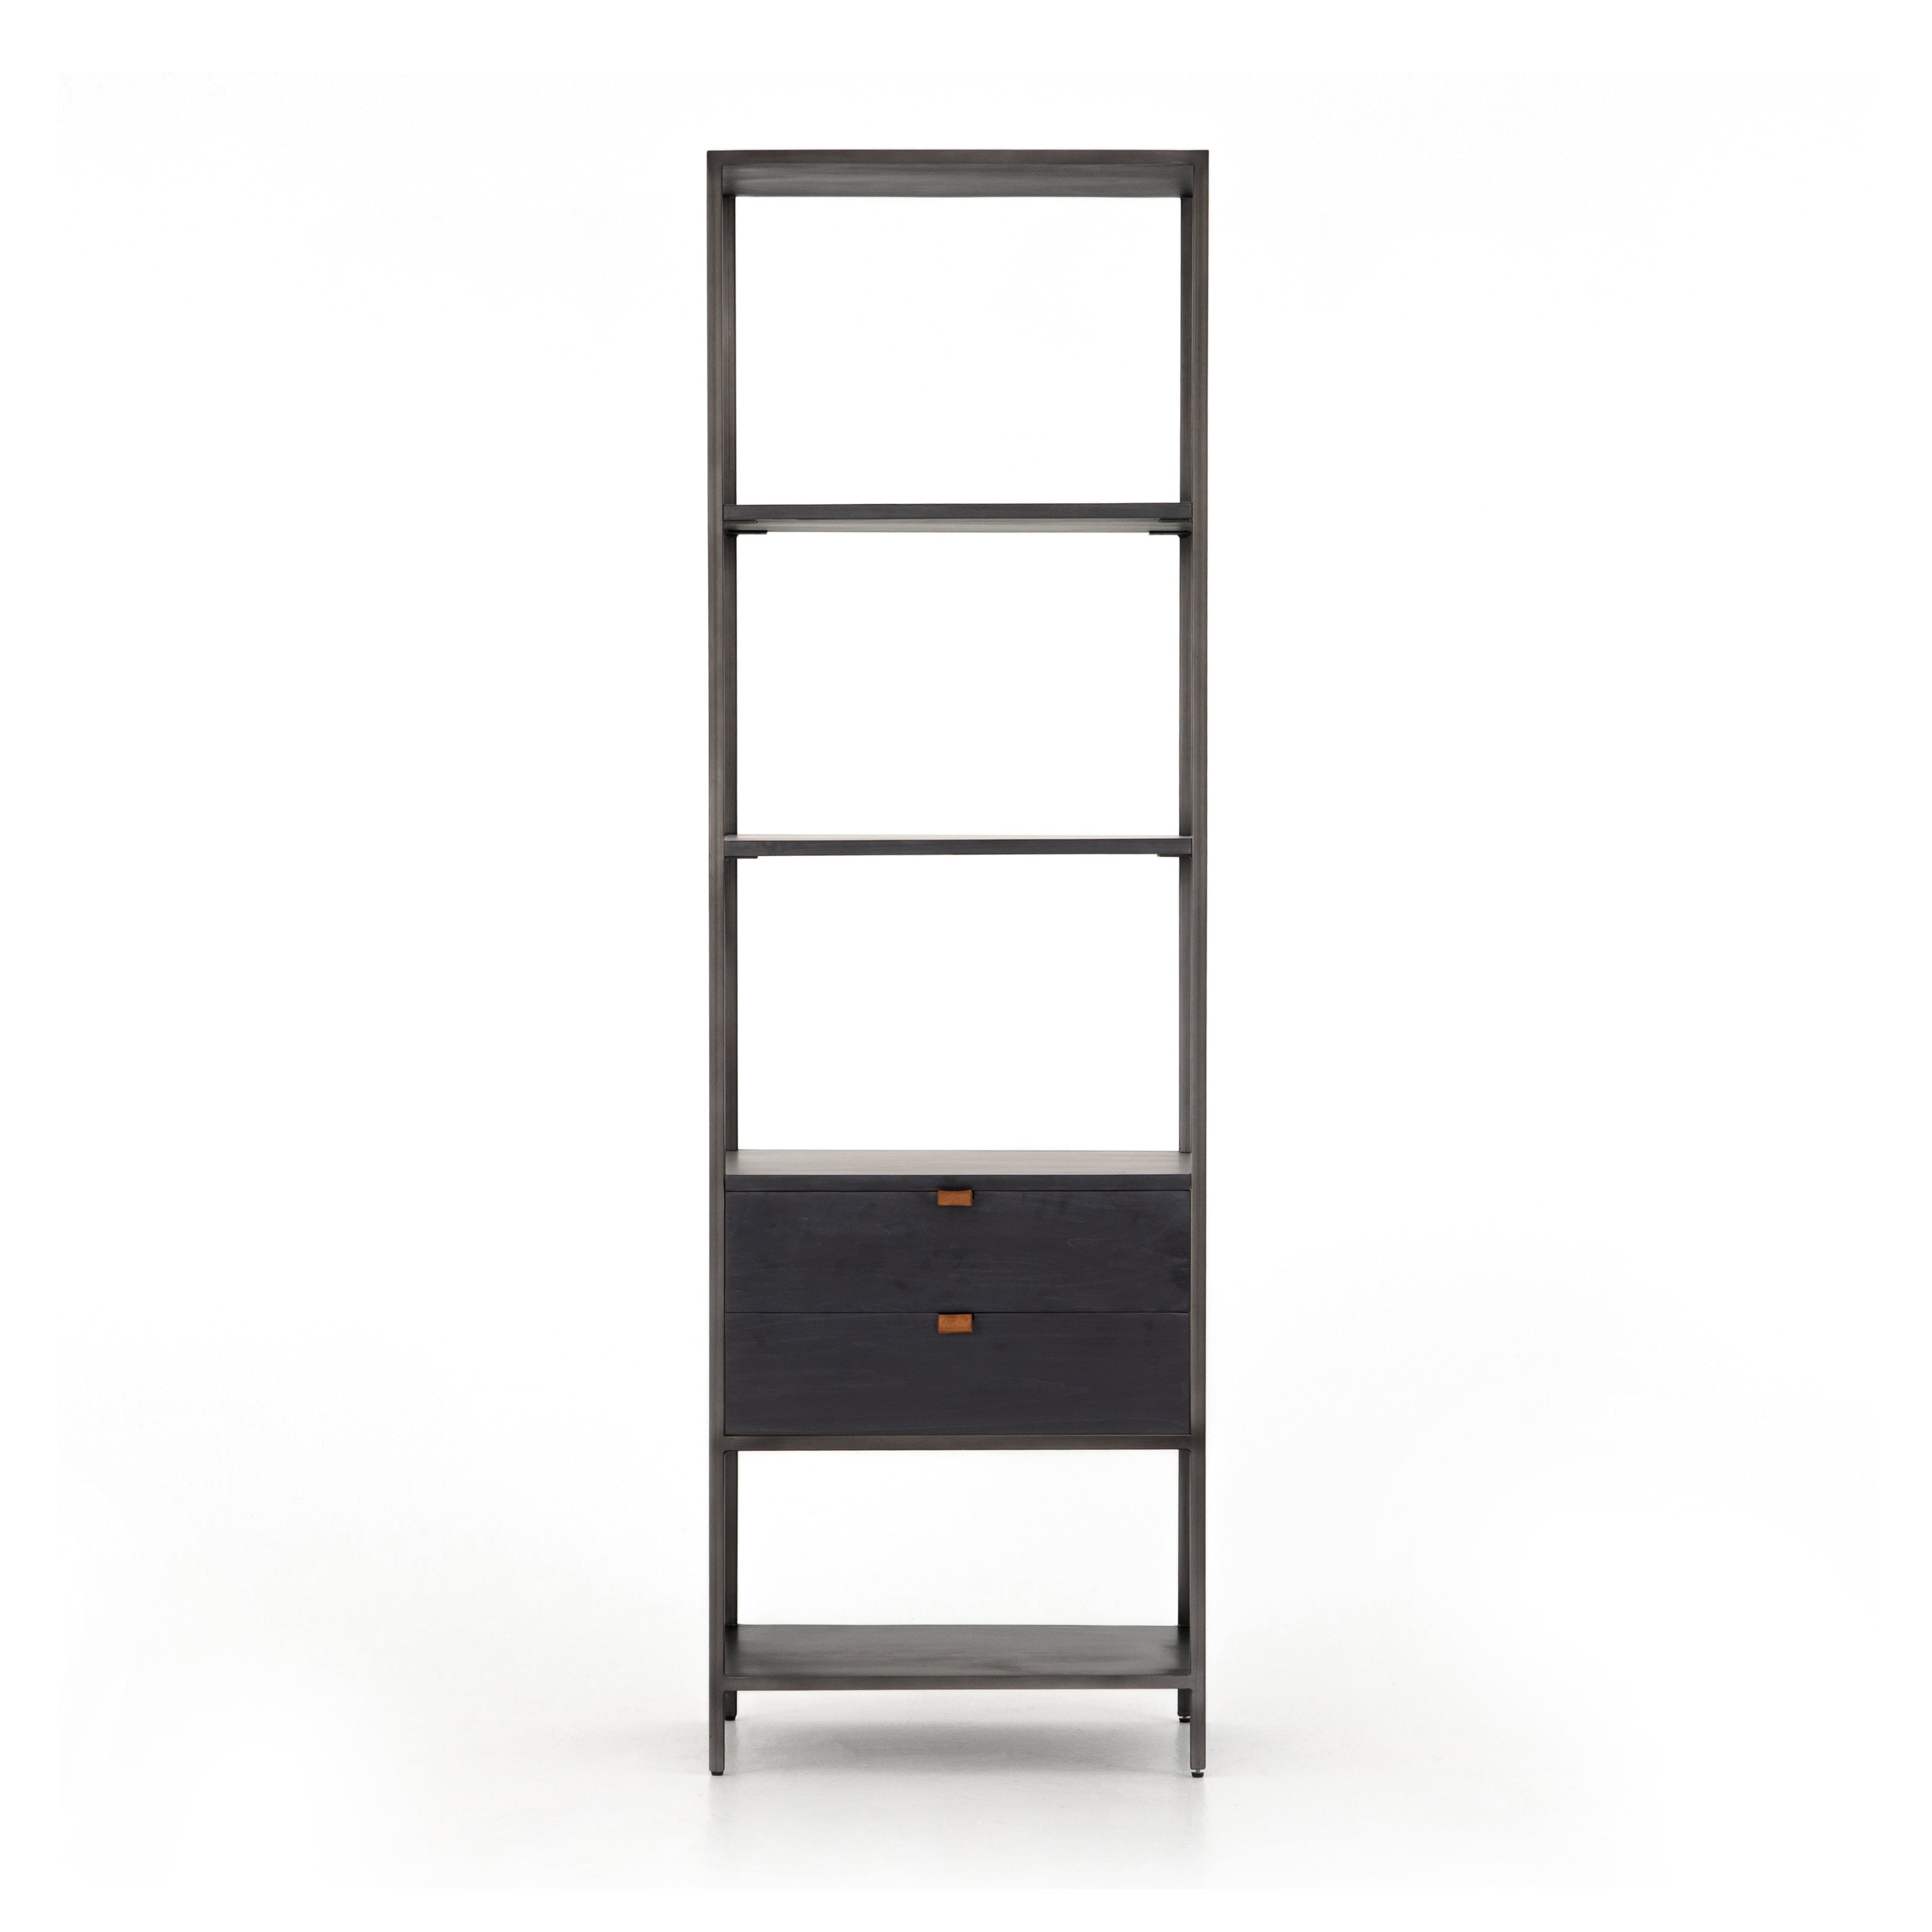 This stylishTrey Bookshelf - Black Wash Poplar offers ample storage space by way of open shelving and dual drawers. Metal-secured pulls of toffee top-grain leather add a textural element of surprise to any office, bedroom, or other space.   Overall Dimensions: 24.00"w x 18.00"d x 78.25"h